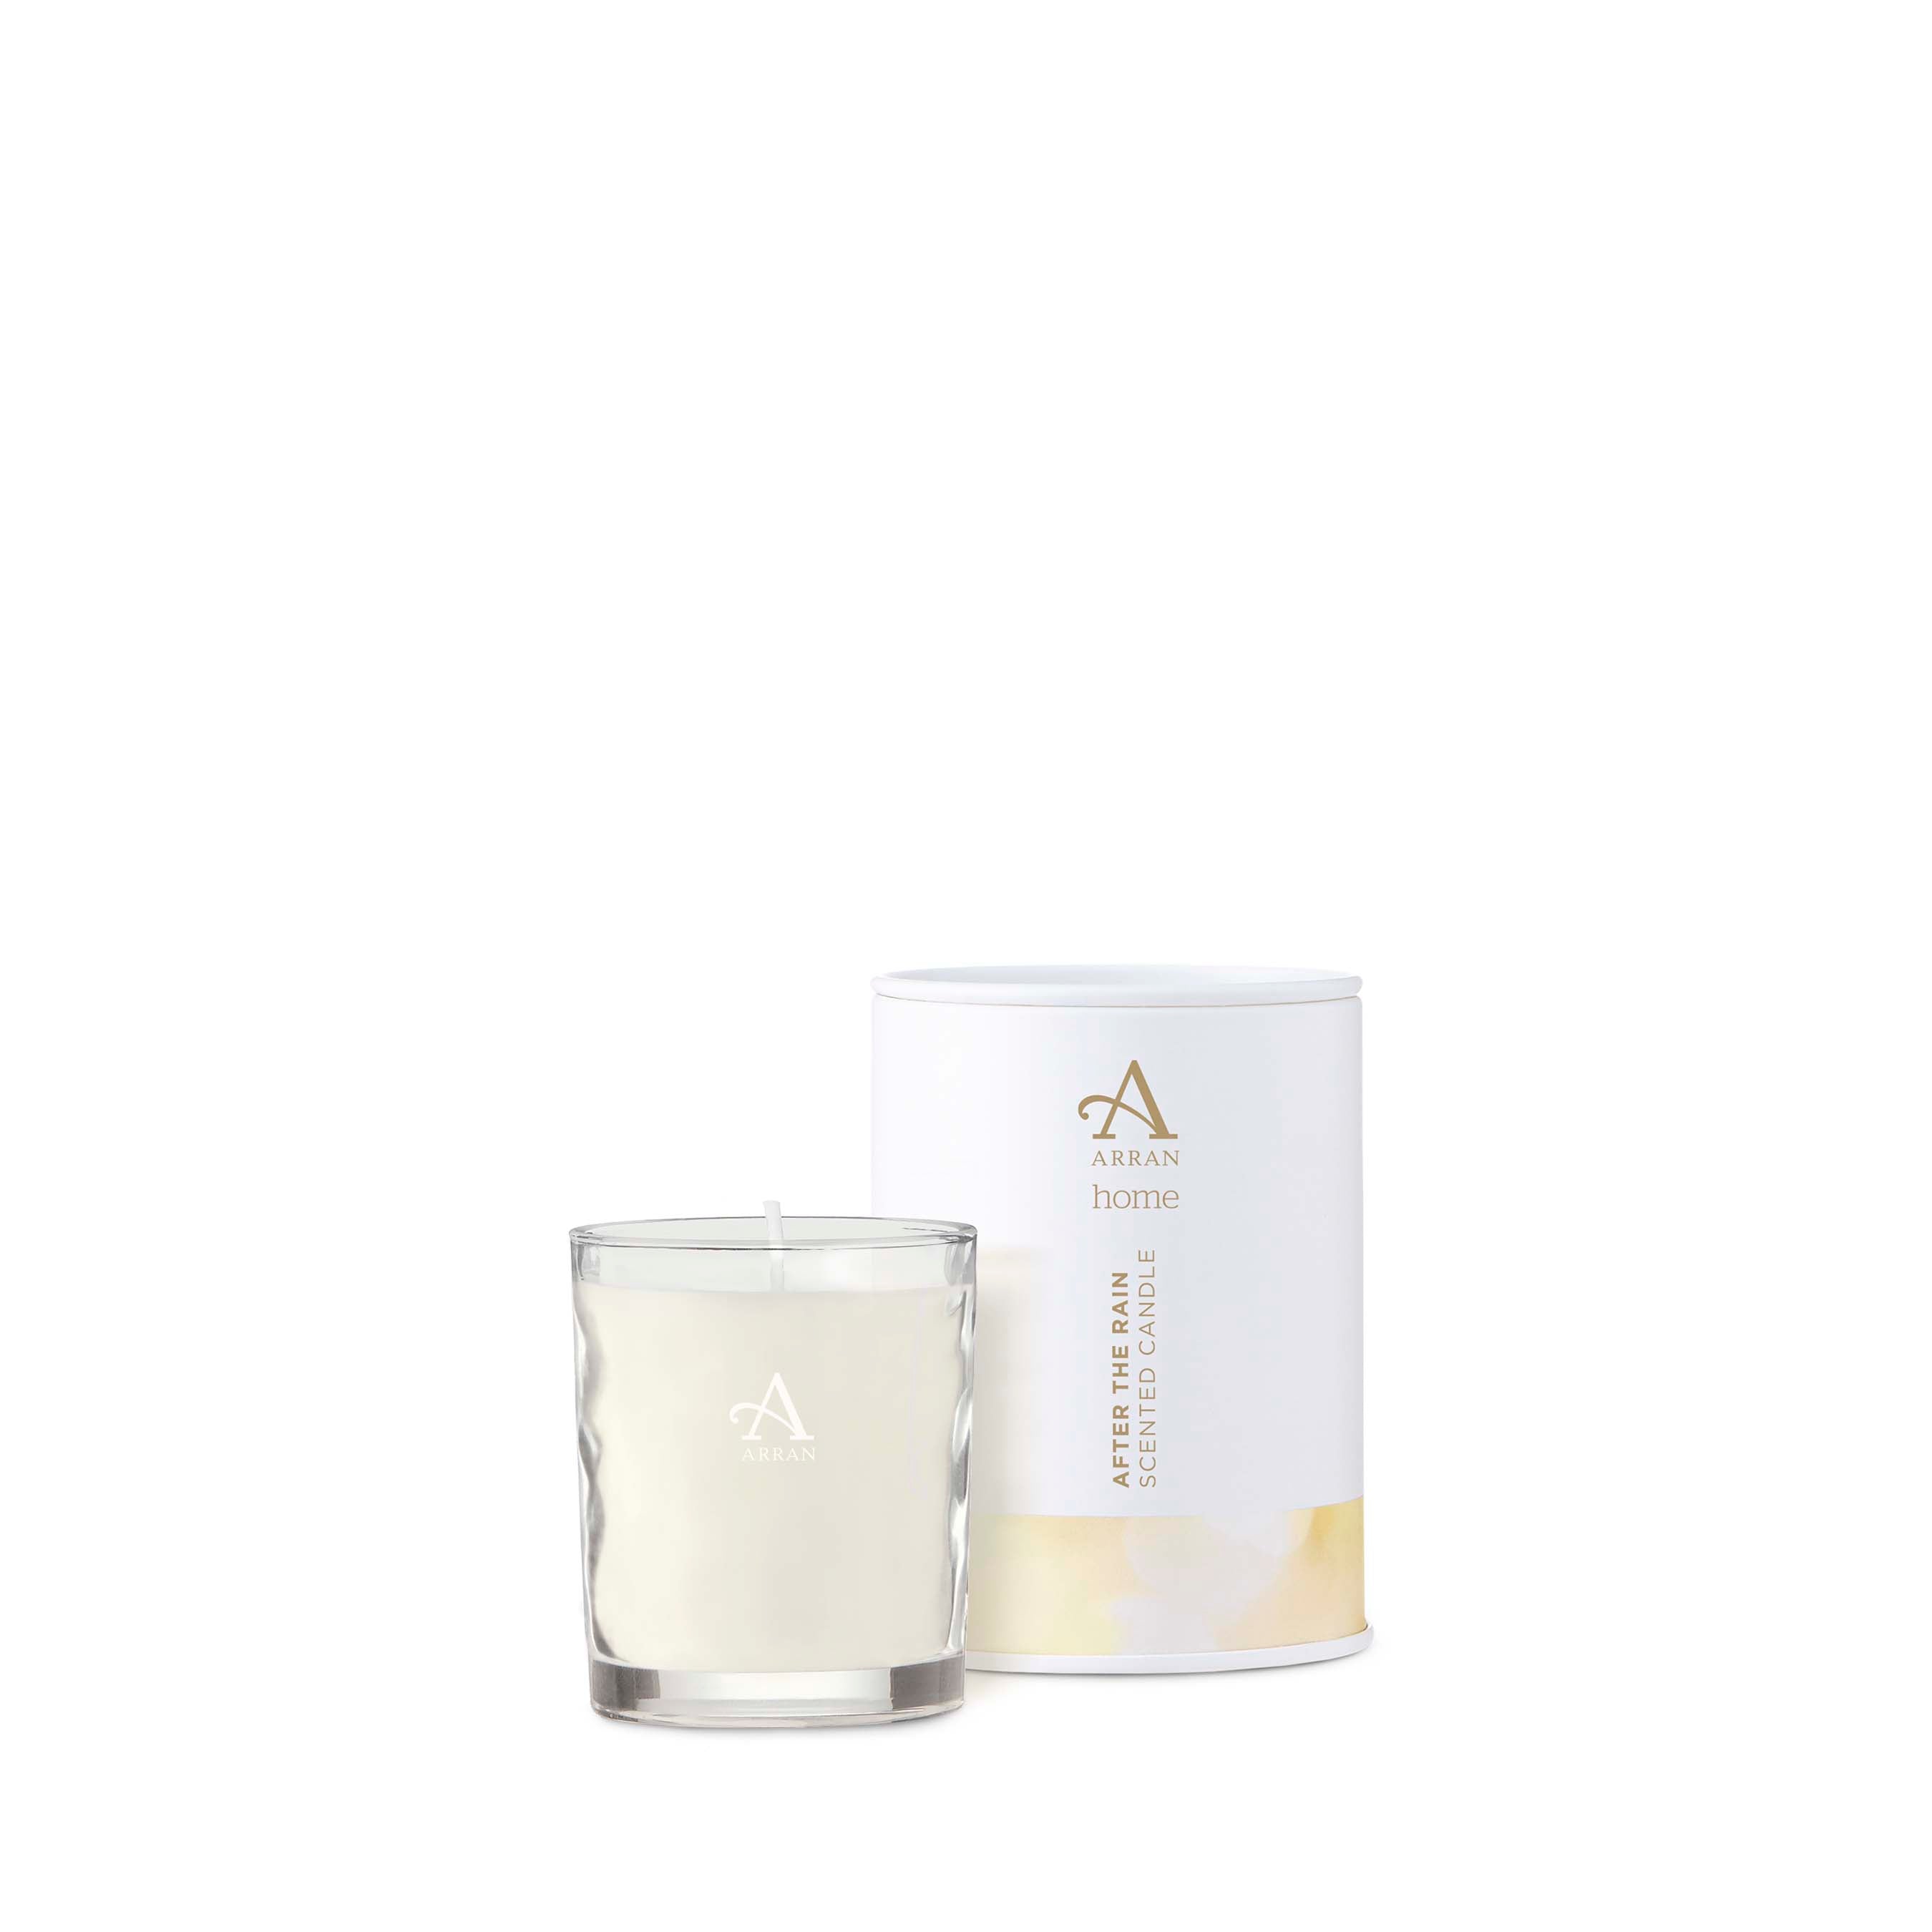 An image of ARRAN After the Rain 8cl Scented Candle | Made in Scotland | Lime, Rose & Sandal...